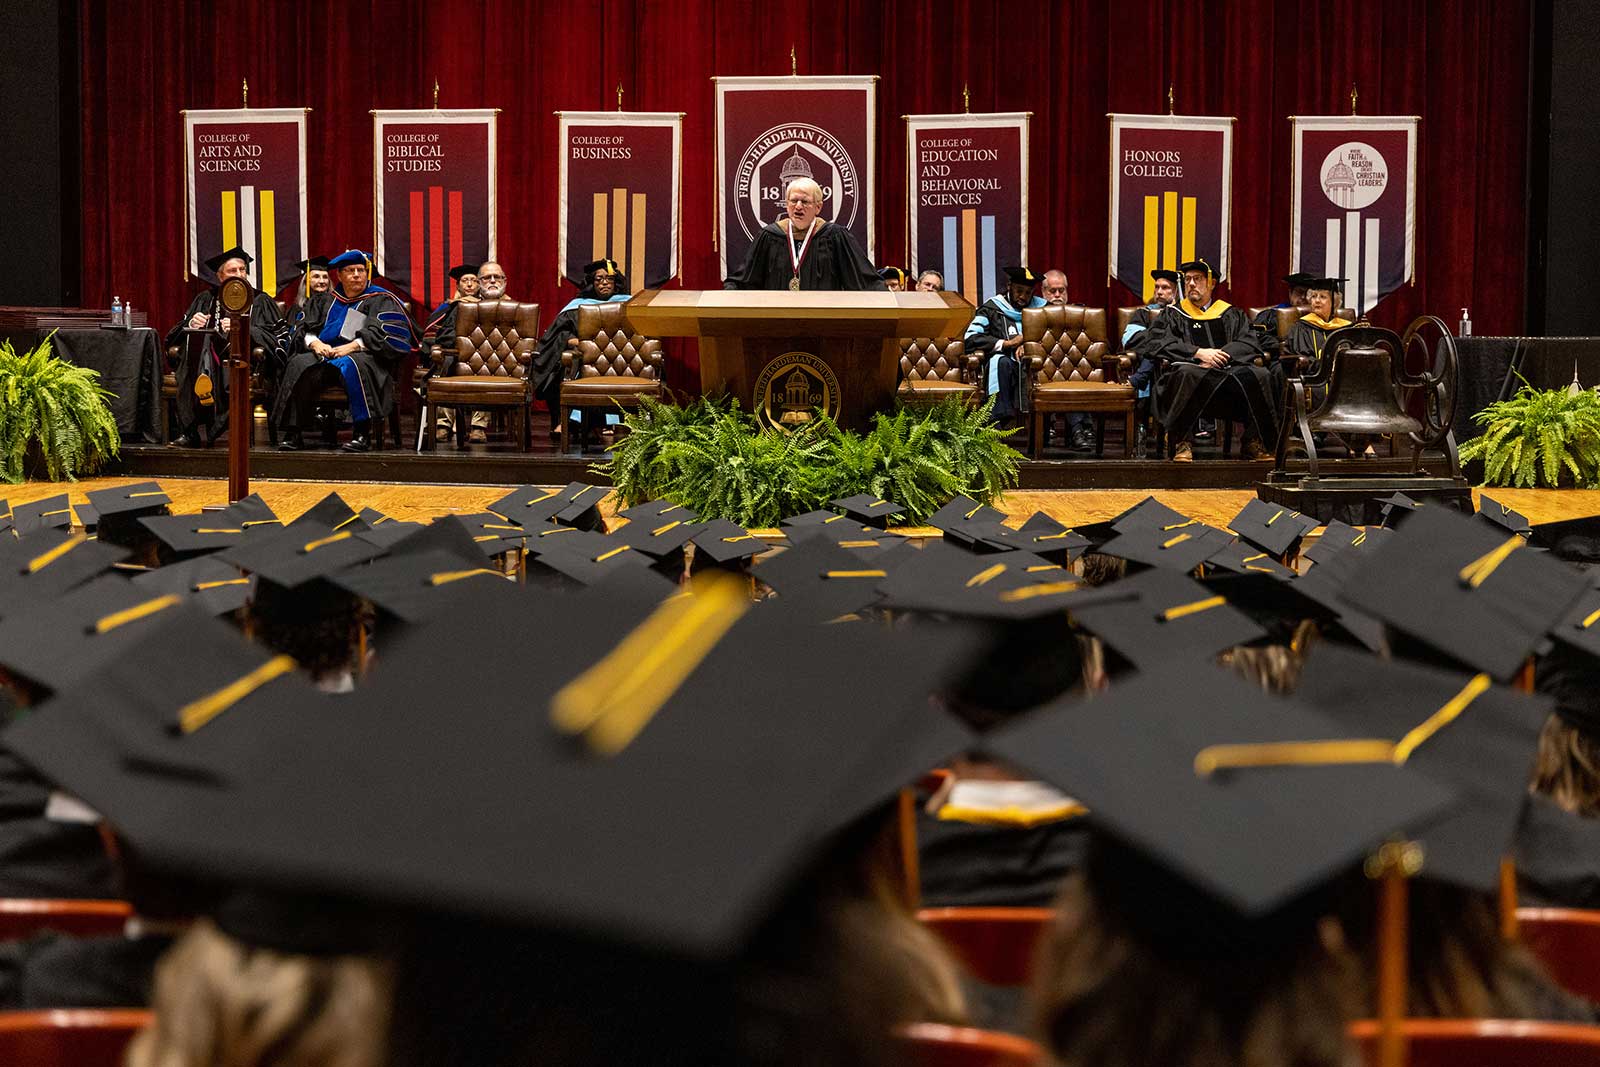 Whether you are pursuing a master's degree, bachelor's degree in business, or one of our other business master's degrees, FHU promises to provide quality business school education and supportive community.